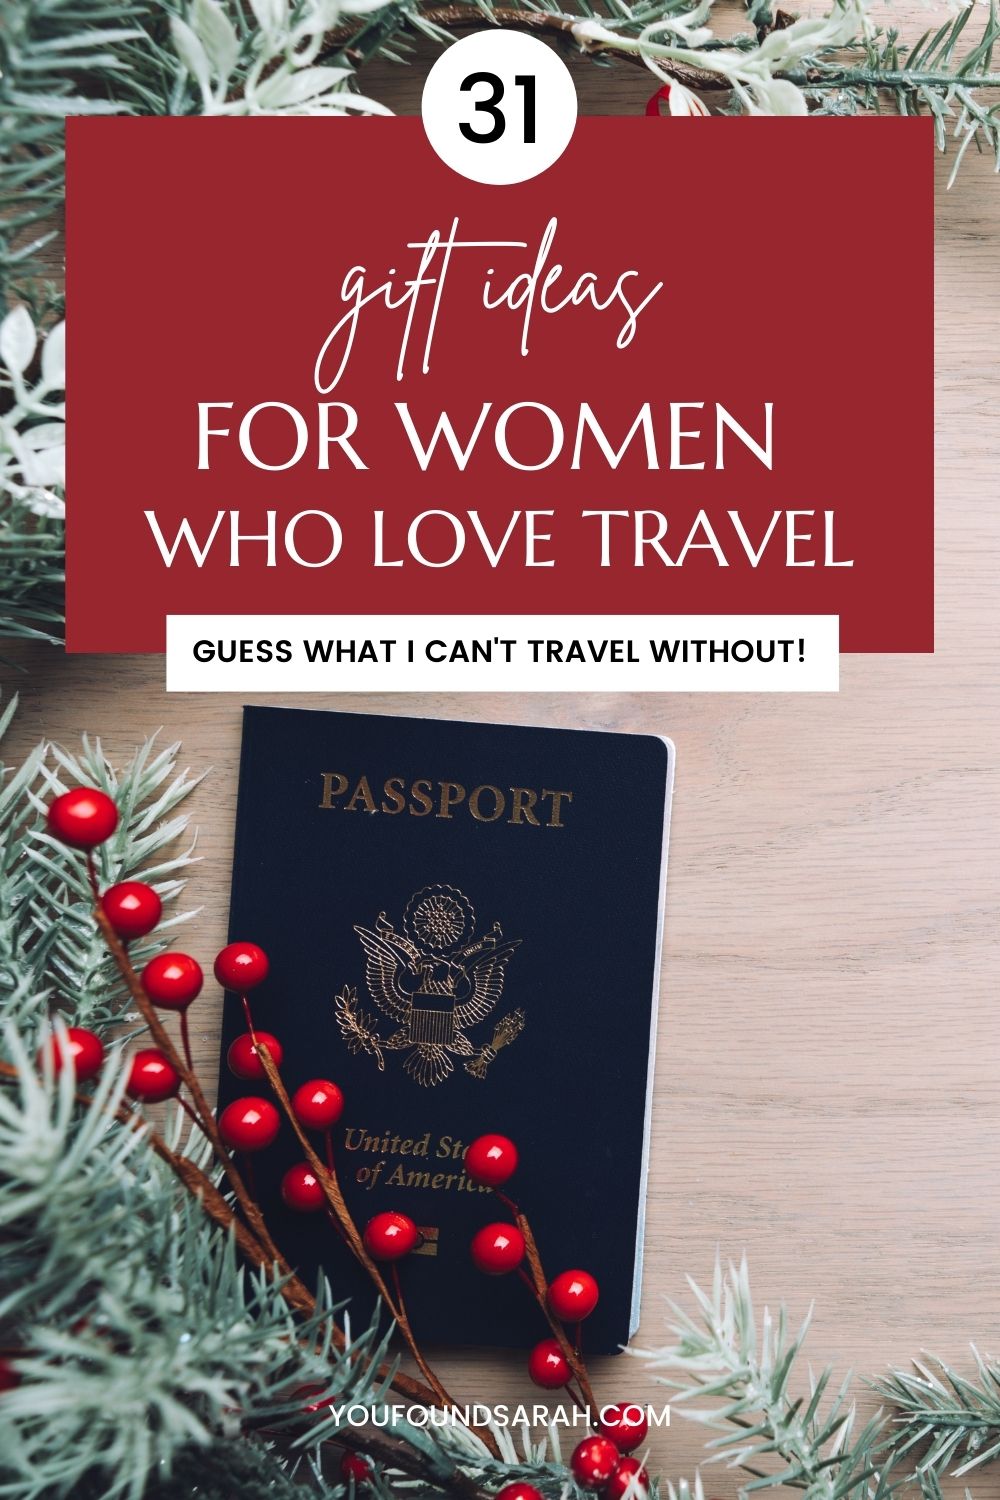 31 Gift Ideas for Women Who Love to Travel